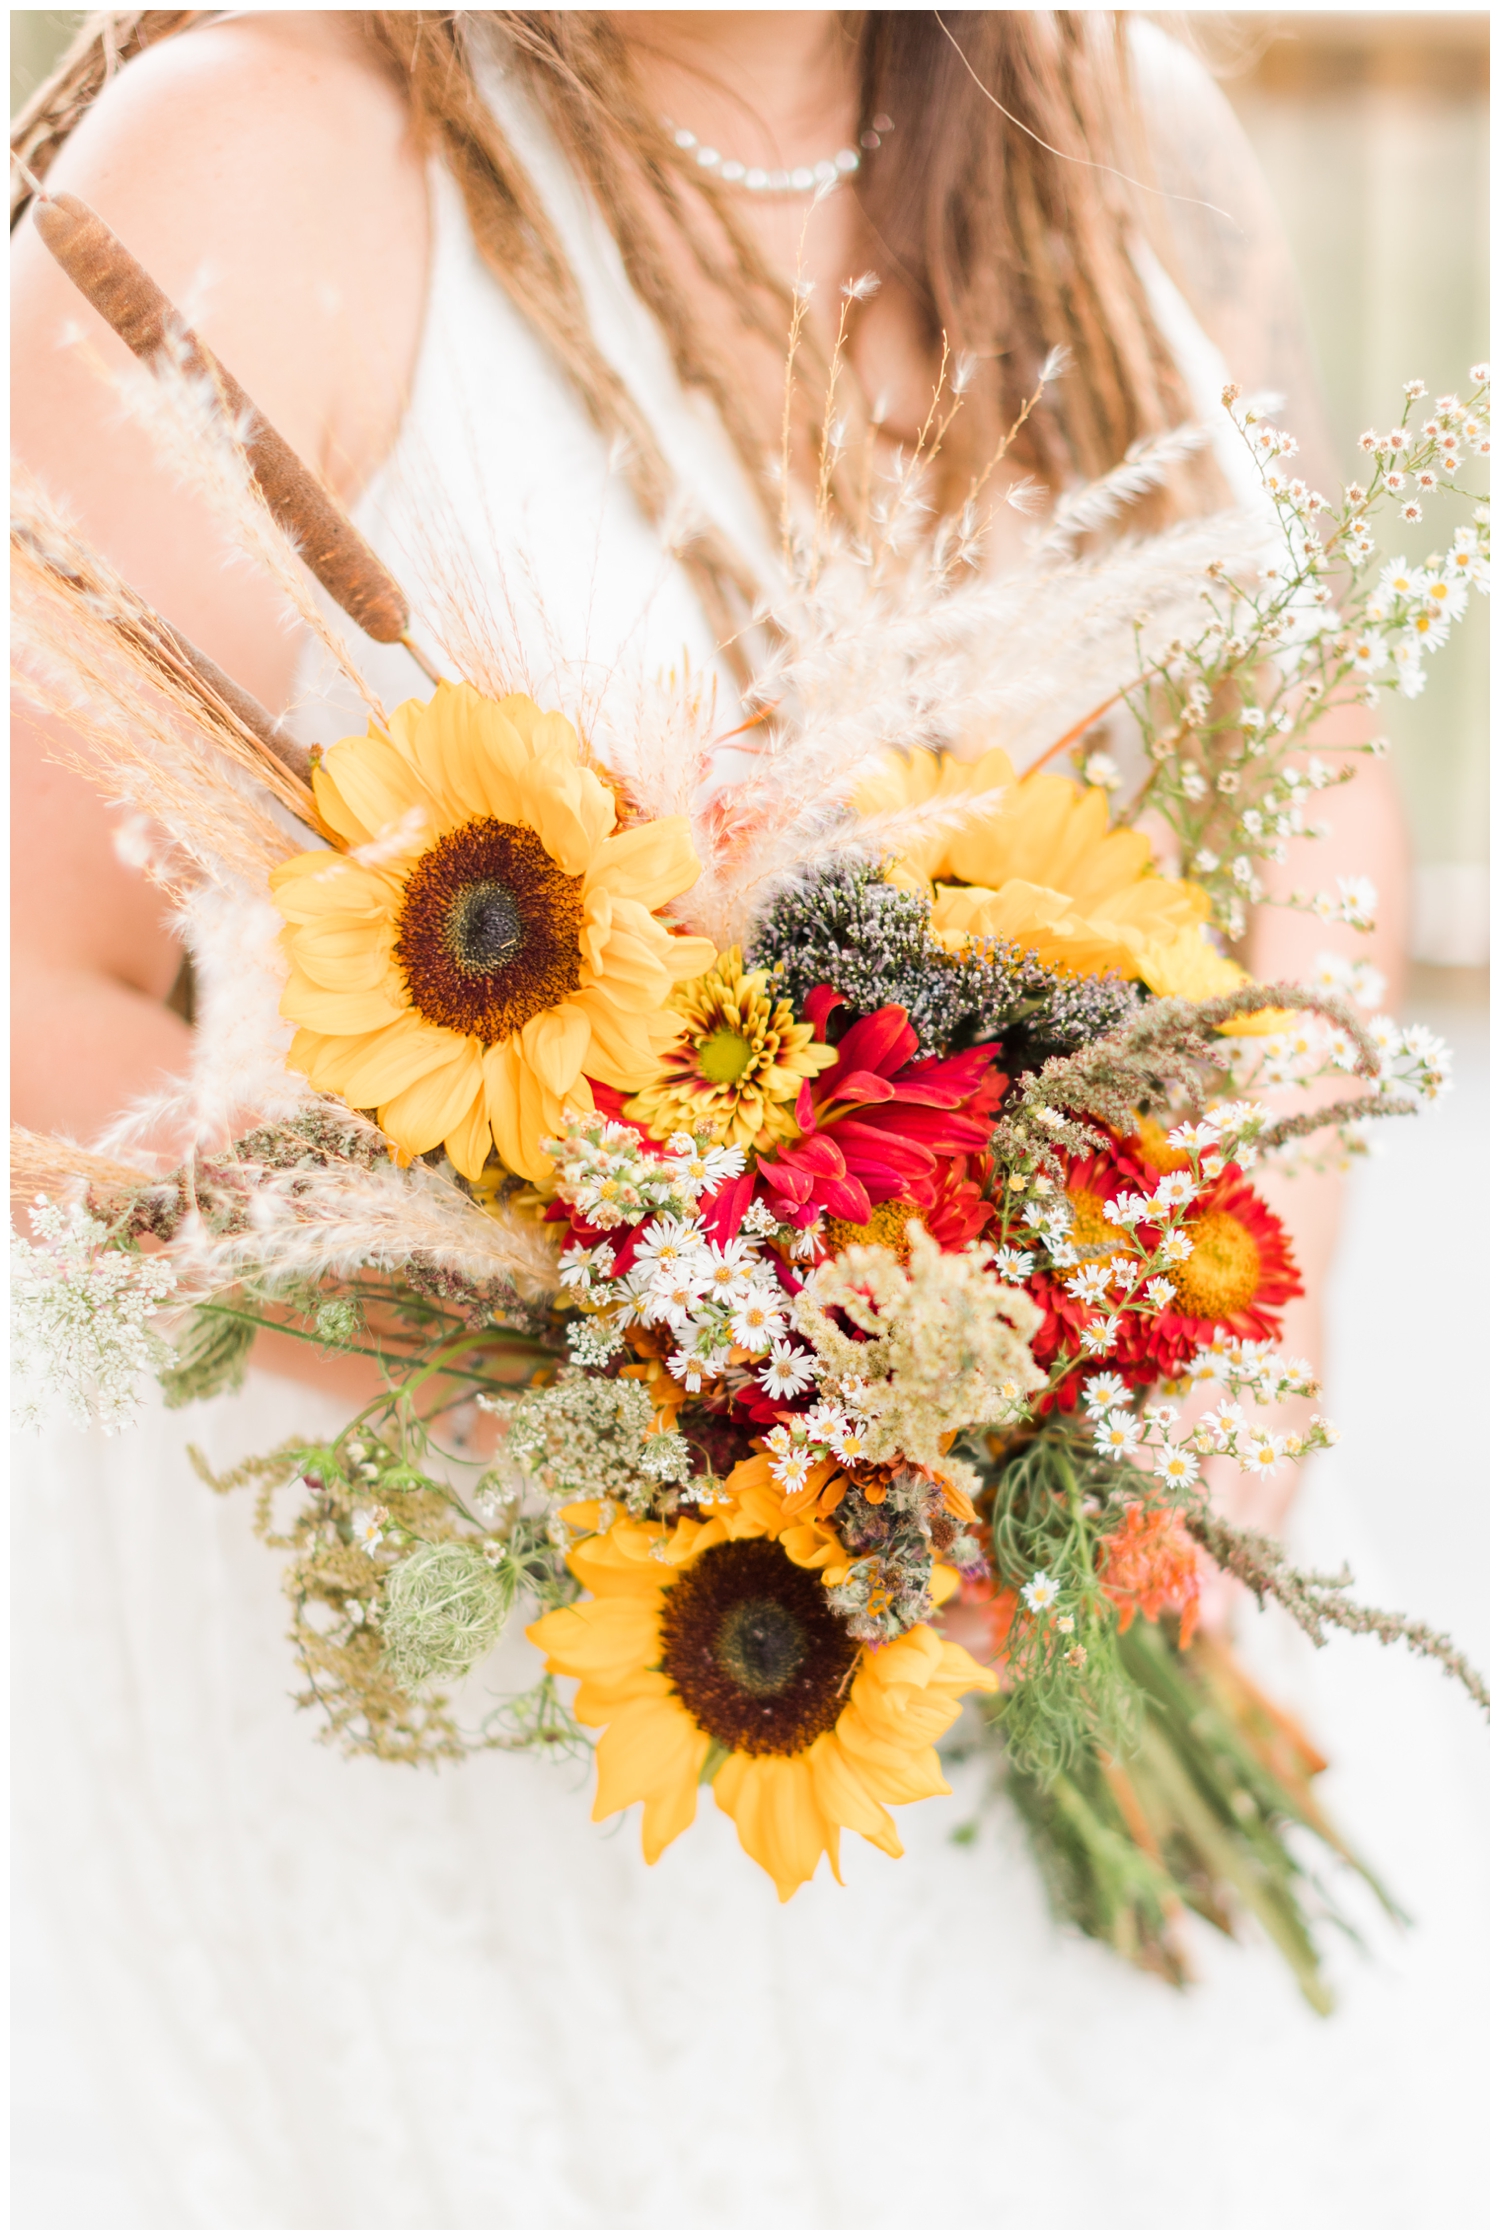 Loose gathered fall bridal bouquet consisting of sunflowers, Queen Anne's lace, cat tails, pampas grass, mums and other various home grown native Iowa florals | CB Studio